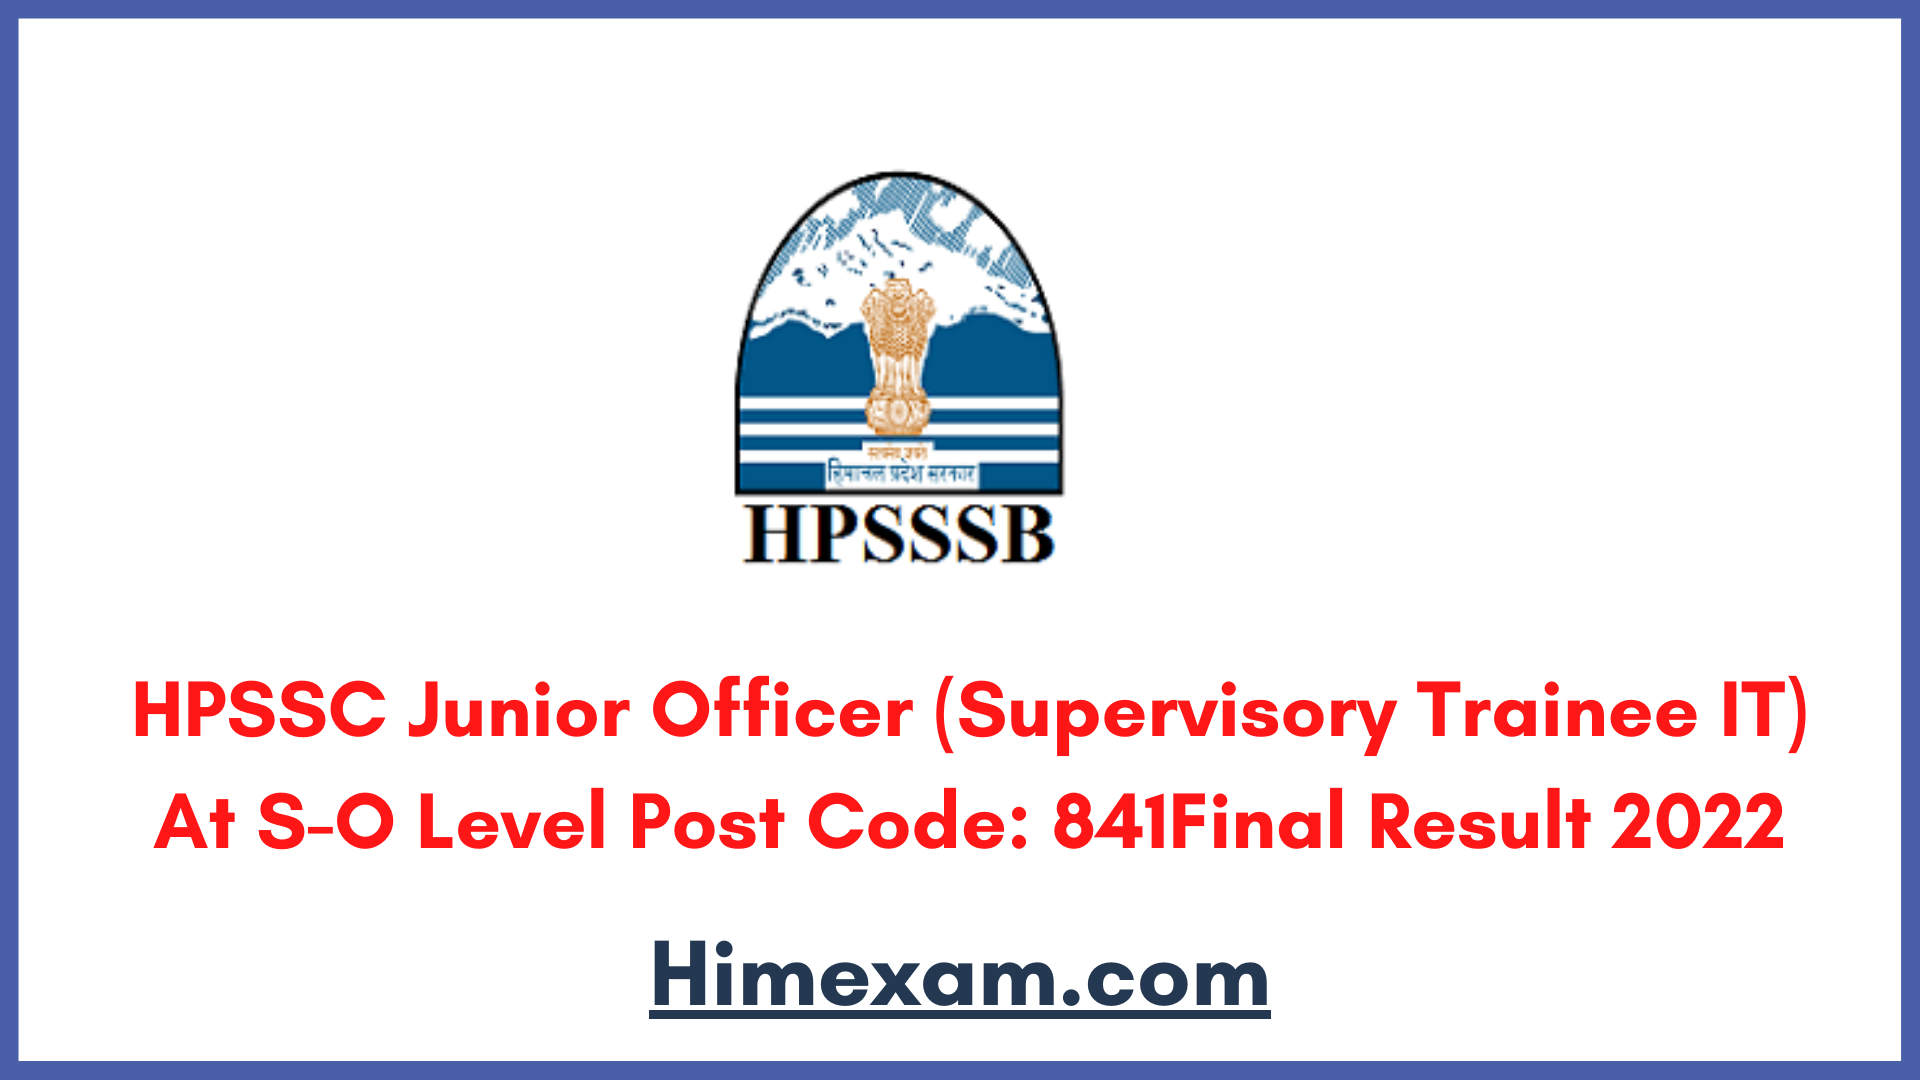 HPSSC Junior Officer (Supervisory Trainee IT) At S-O Level Post Code: 841Final Result 2022